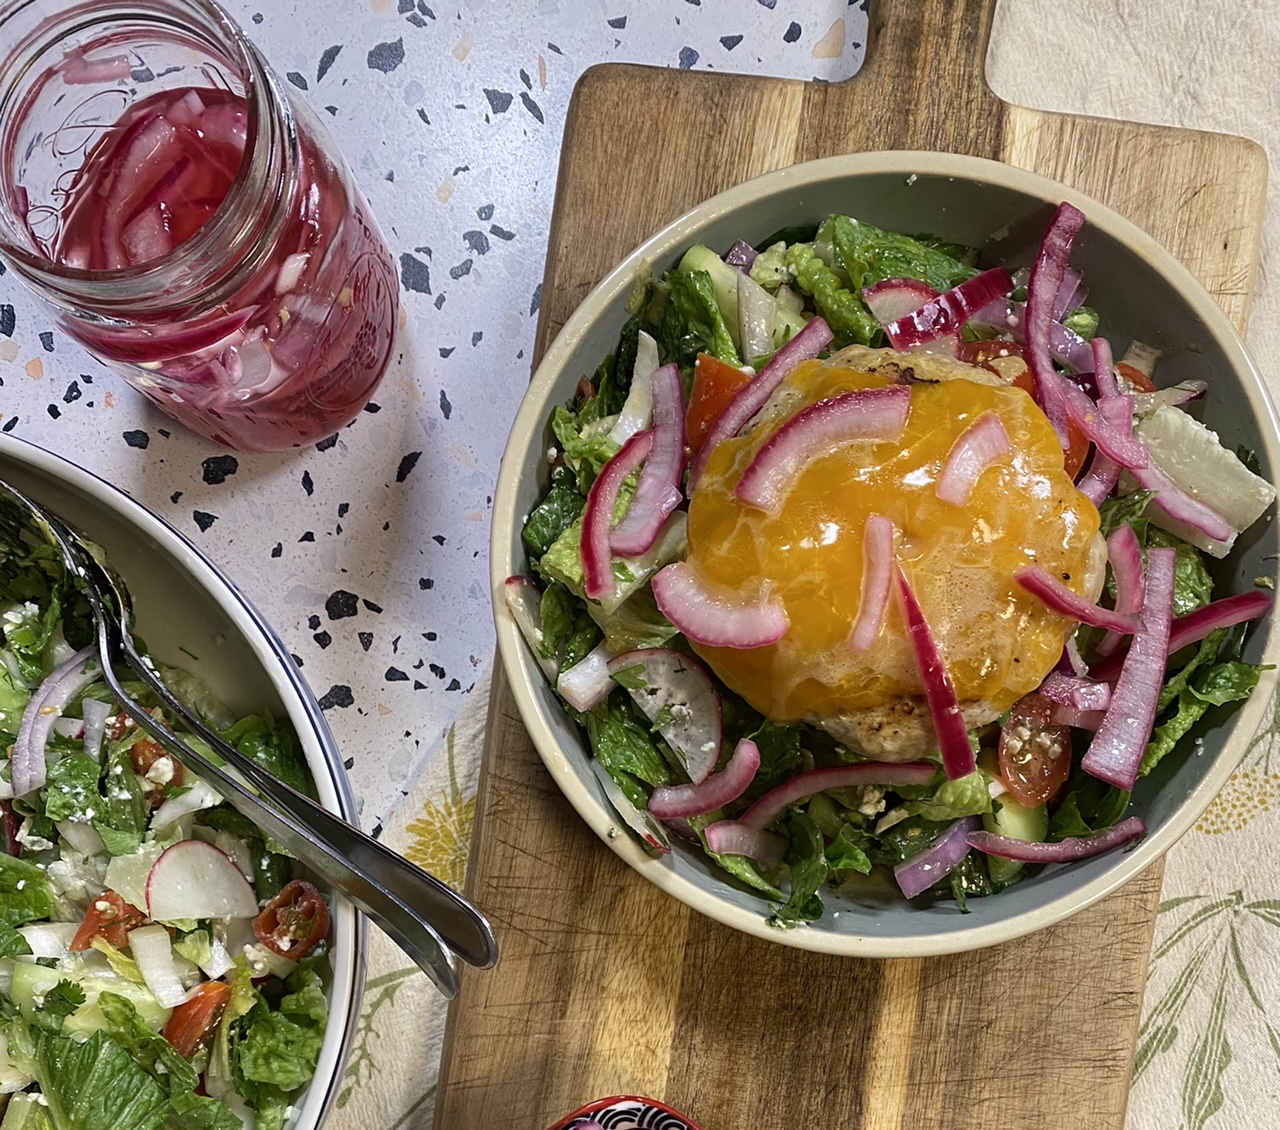 Salad bowl with a chicken burger in a bowl on top of a wooden cutting board